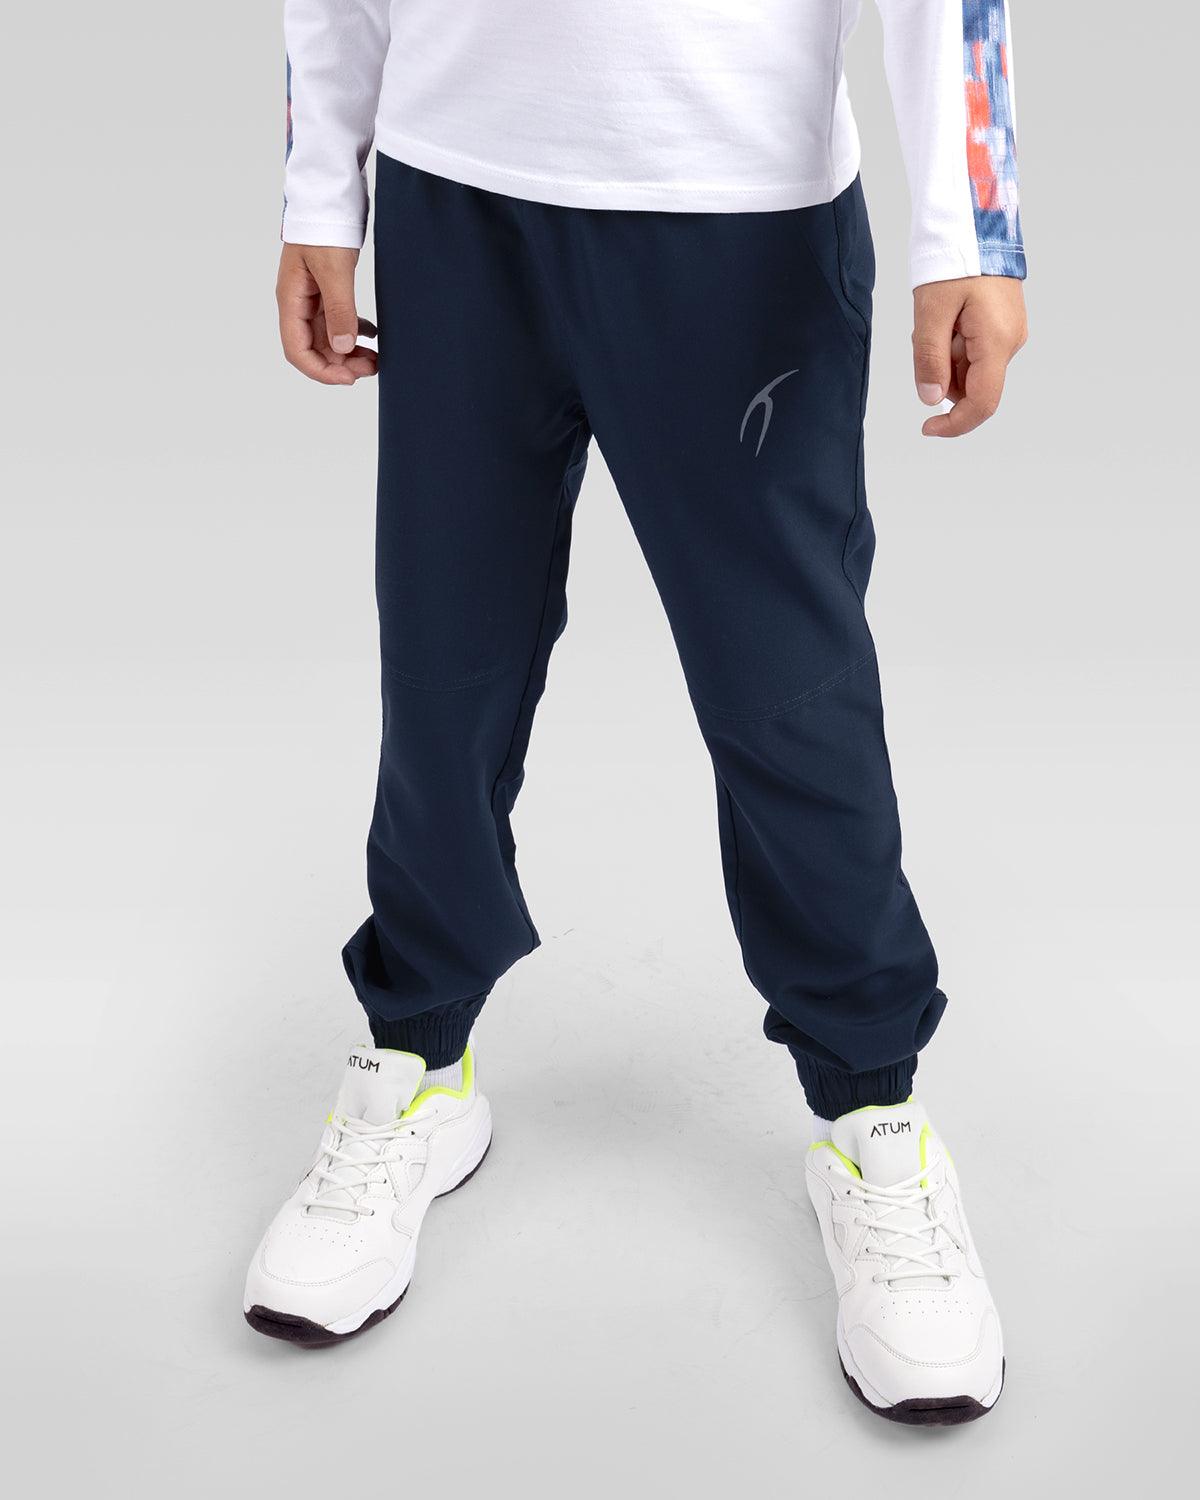 Photo by 𝗔𝗧𝗨ð�— SPORTSWEAR ® on December 20, 2022. May be an image of 1 boy wears a navy sweatpants and a white shoes.